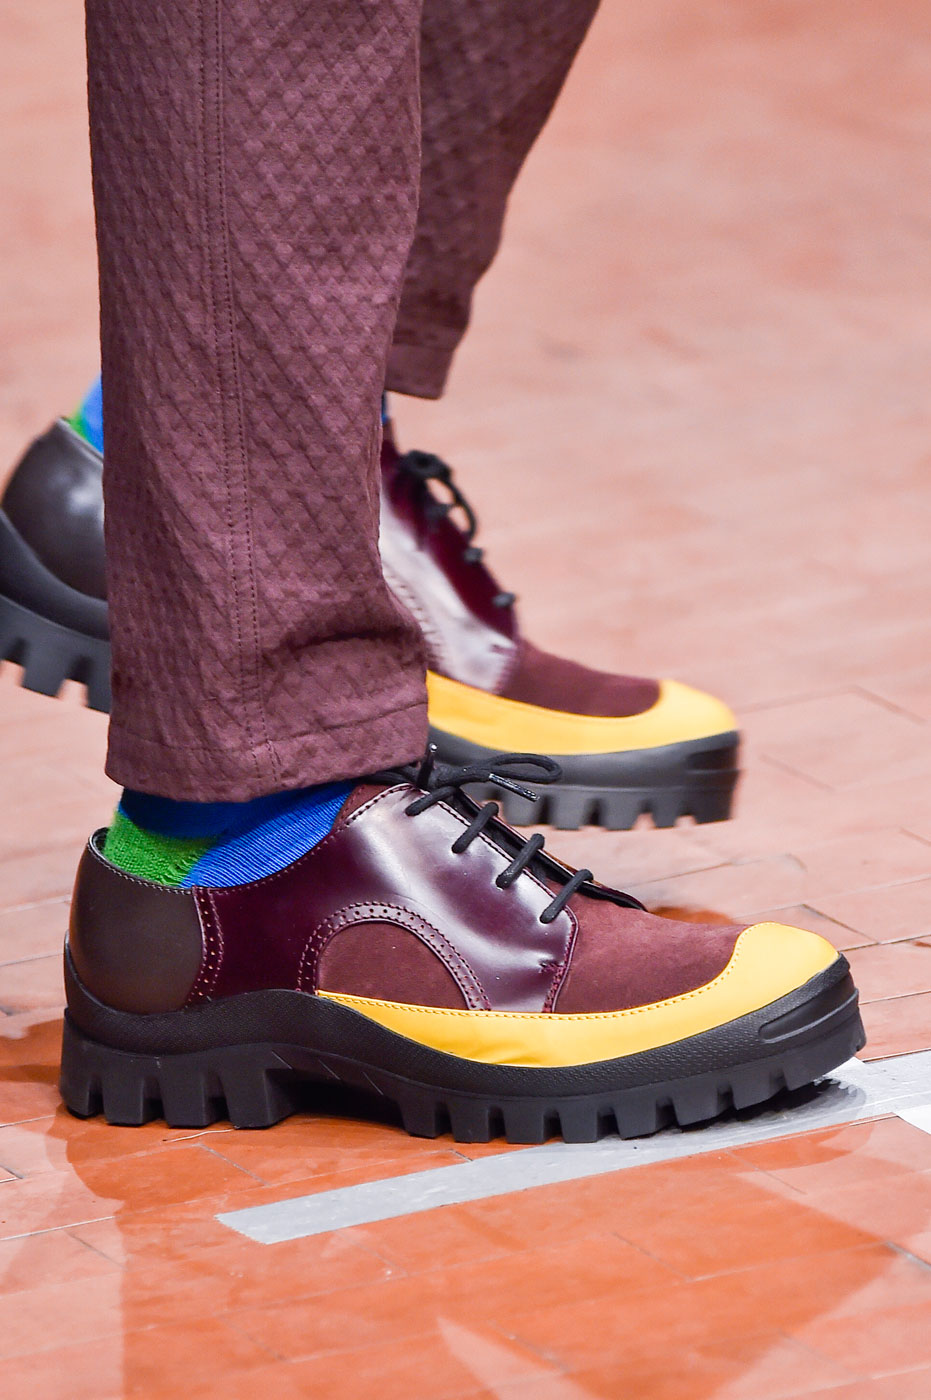 The Hottest Men's Accessories for Fall 2015 - theFashionSpot